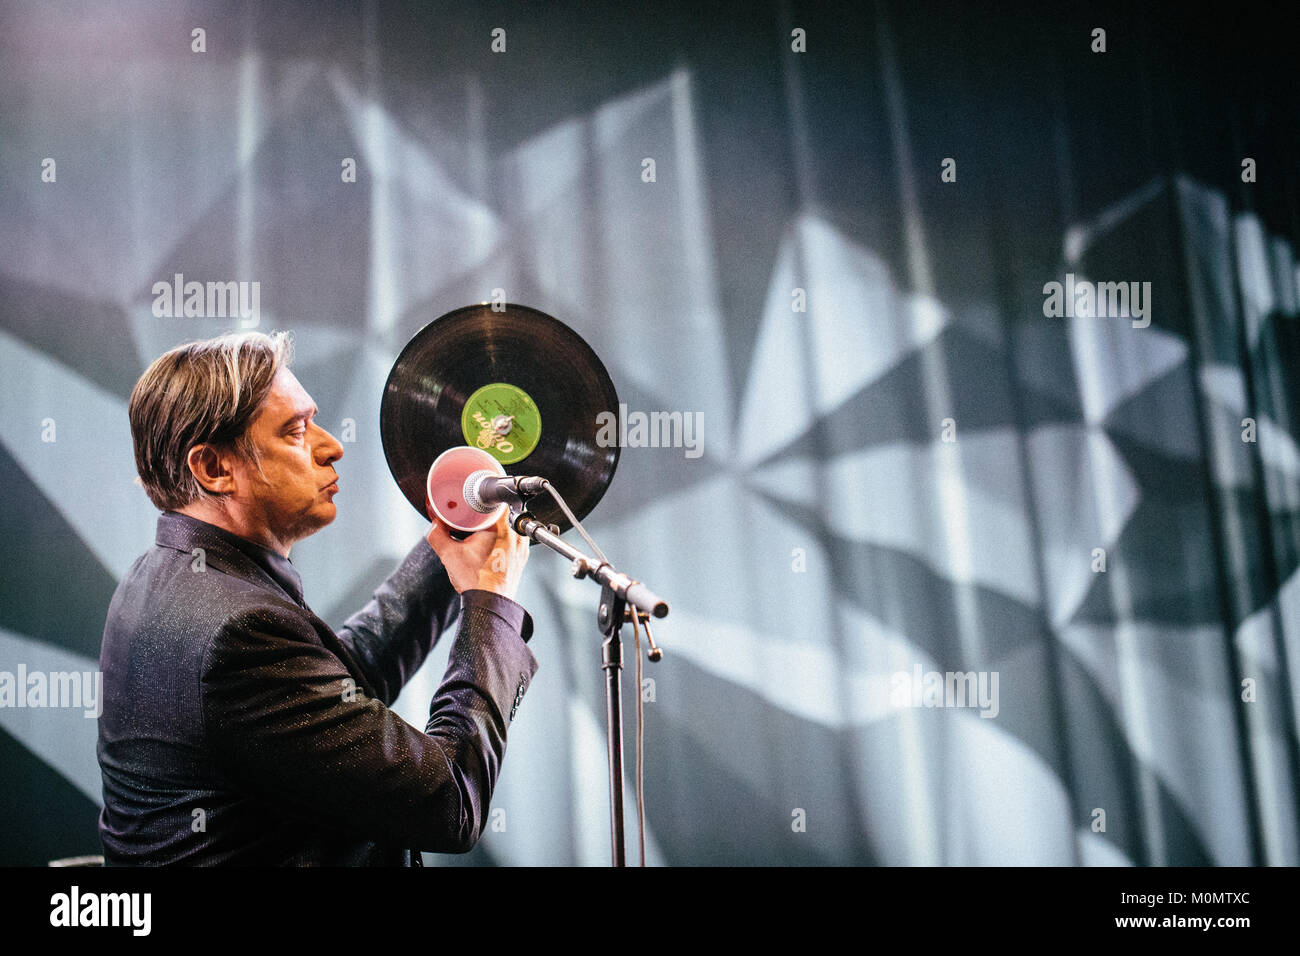 The German industrial band Einstürzende Neubauten performs a live concert at the Danish music festival Roskilde Festival 2015. Here singer and artist Blixa Bargeld is pictured live on stage. Denmark, 03/07 2015. Stock Photo